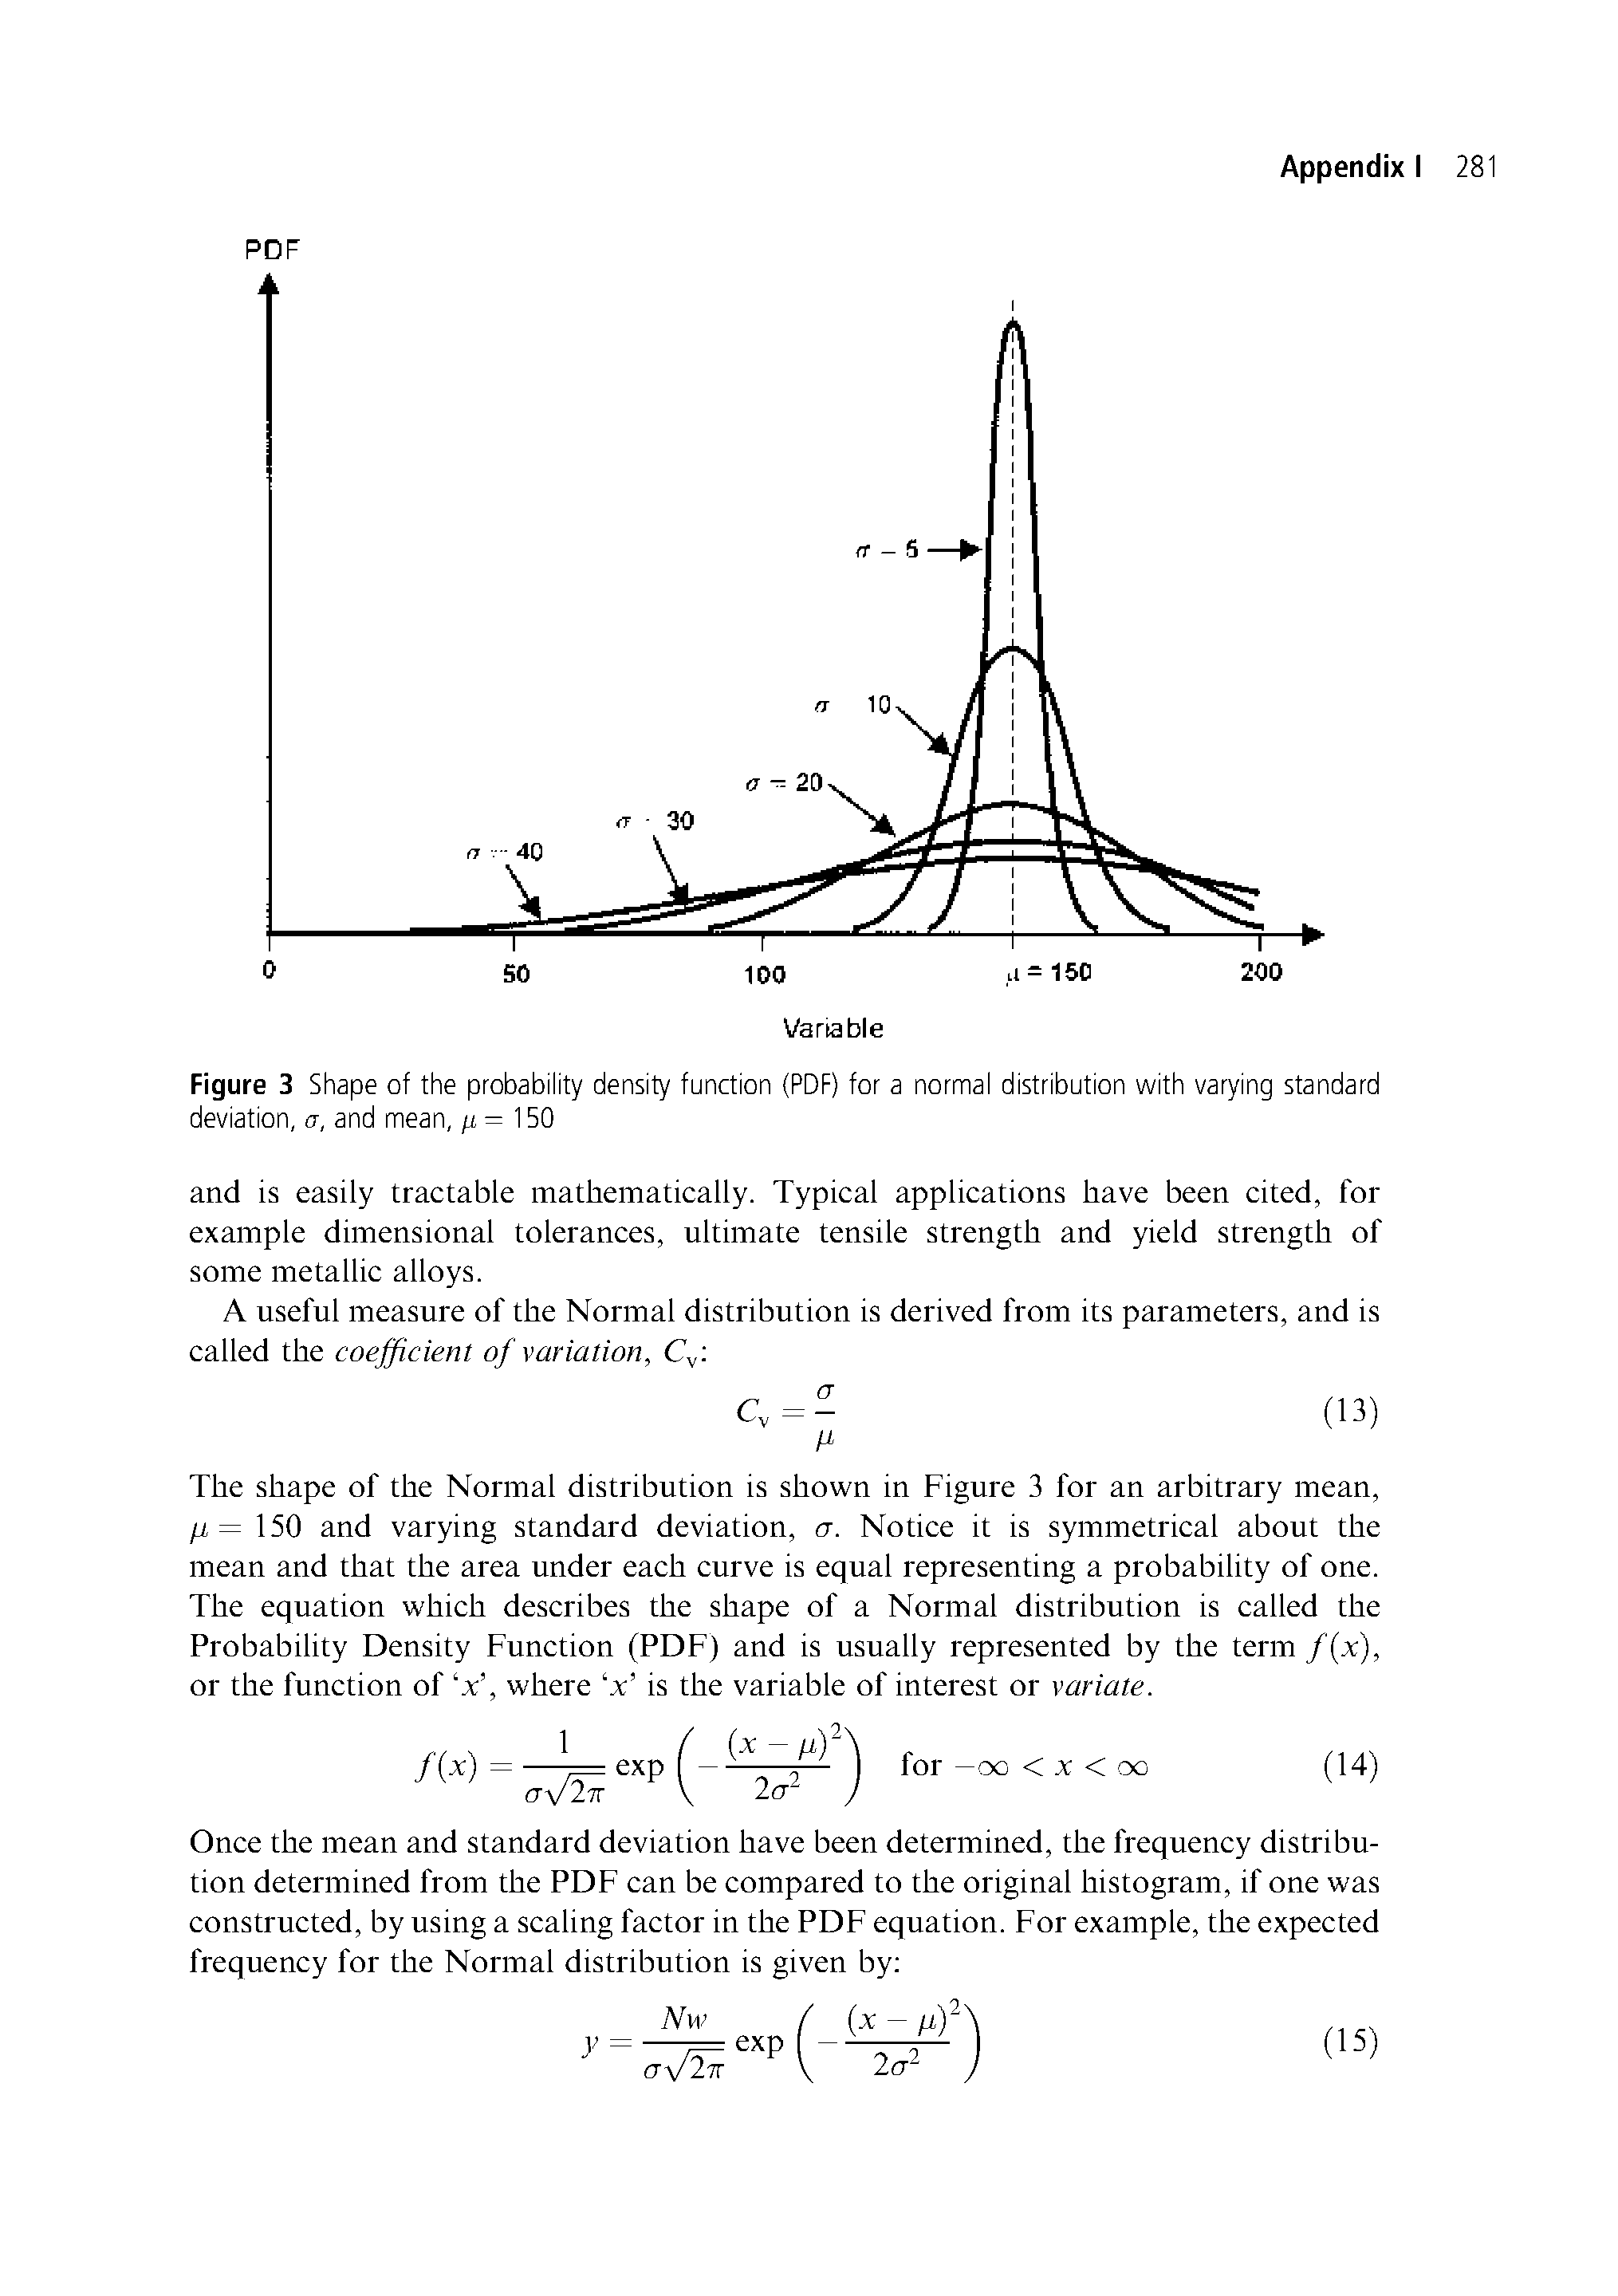 Figure 3 Shape of the probability density function (PDF) for a normal distribution with varying standard deviation, a, and mean, /i = 150...